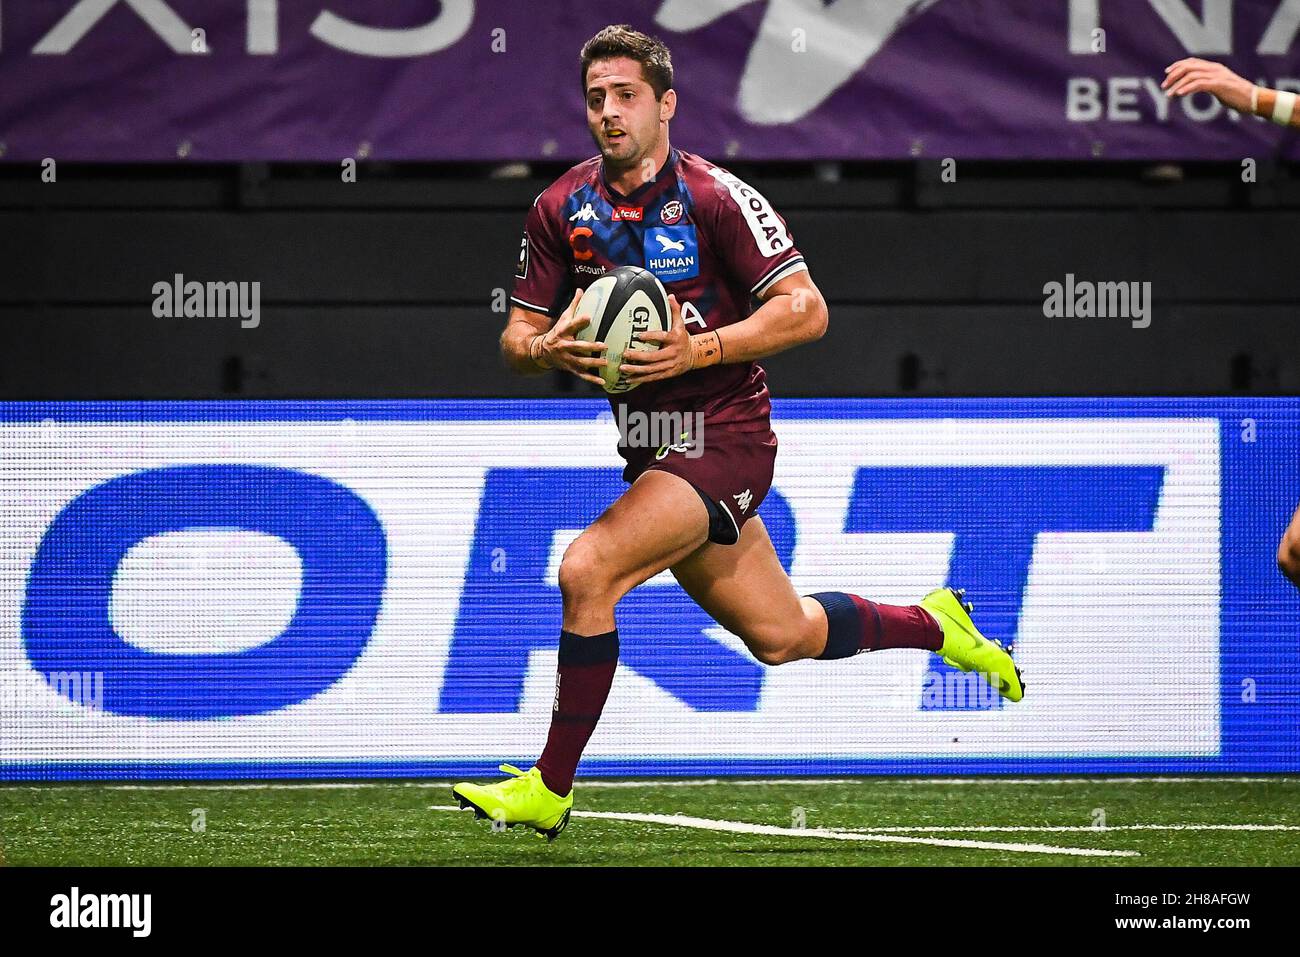 Santiago CORDERO POCIELLO-ARGERICH of Bordeaux during the French championship Top 14 rugby union match between Racing 92 and Union Bordeaux-Bègles on November 28, 2021 at Paris La Défense Arena in Nanterre, France - Photo Matthieu Mirville / DPPI Stock Photo